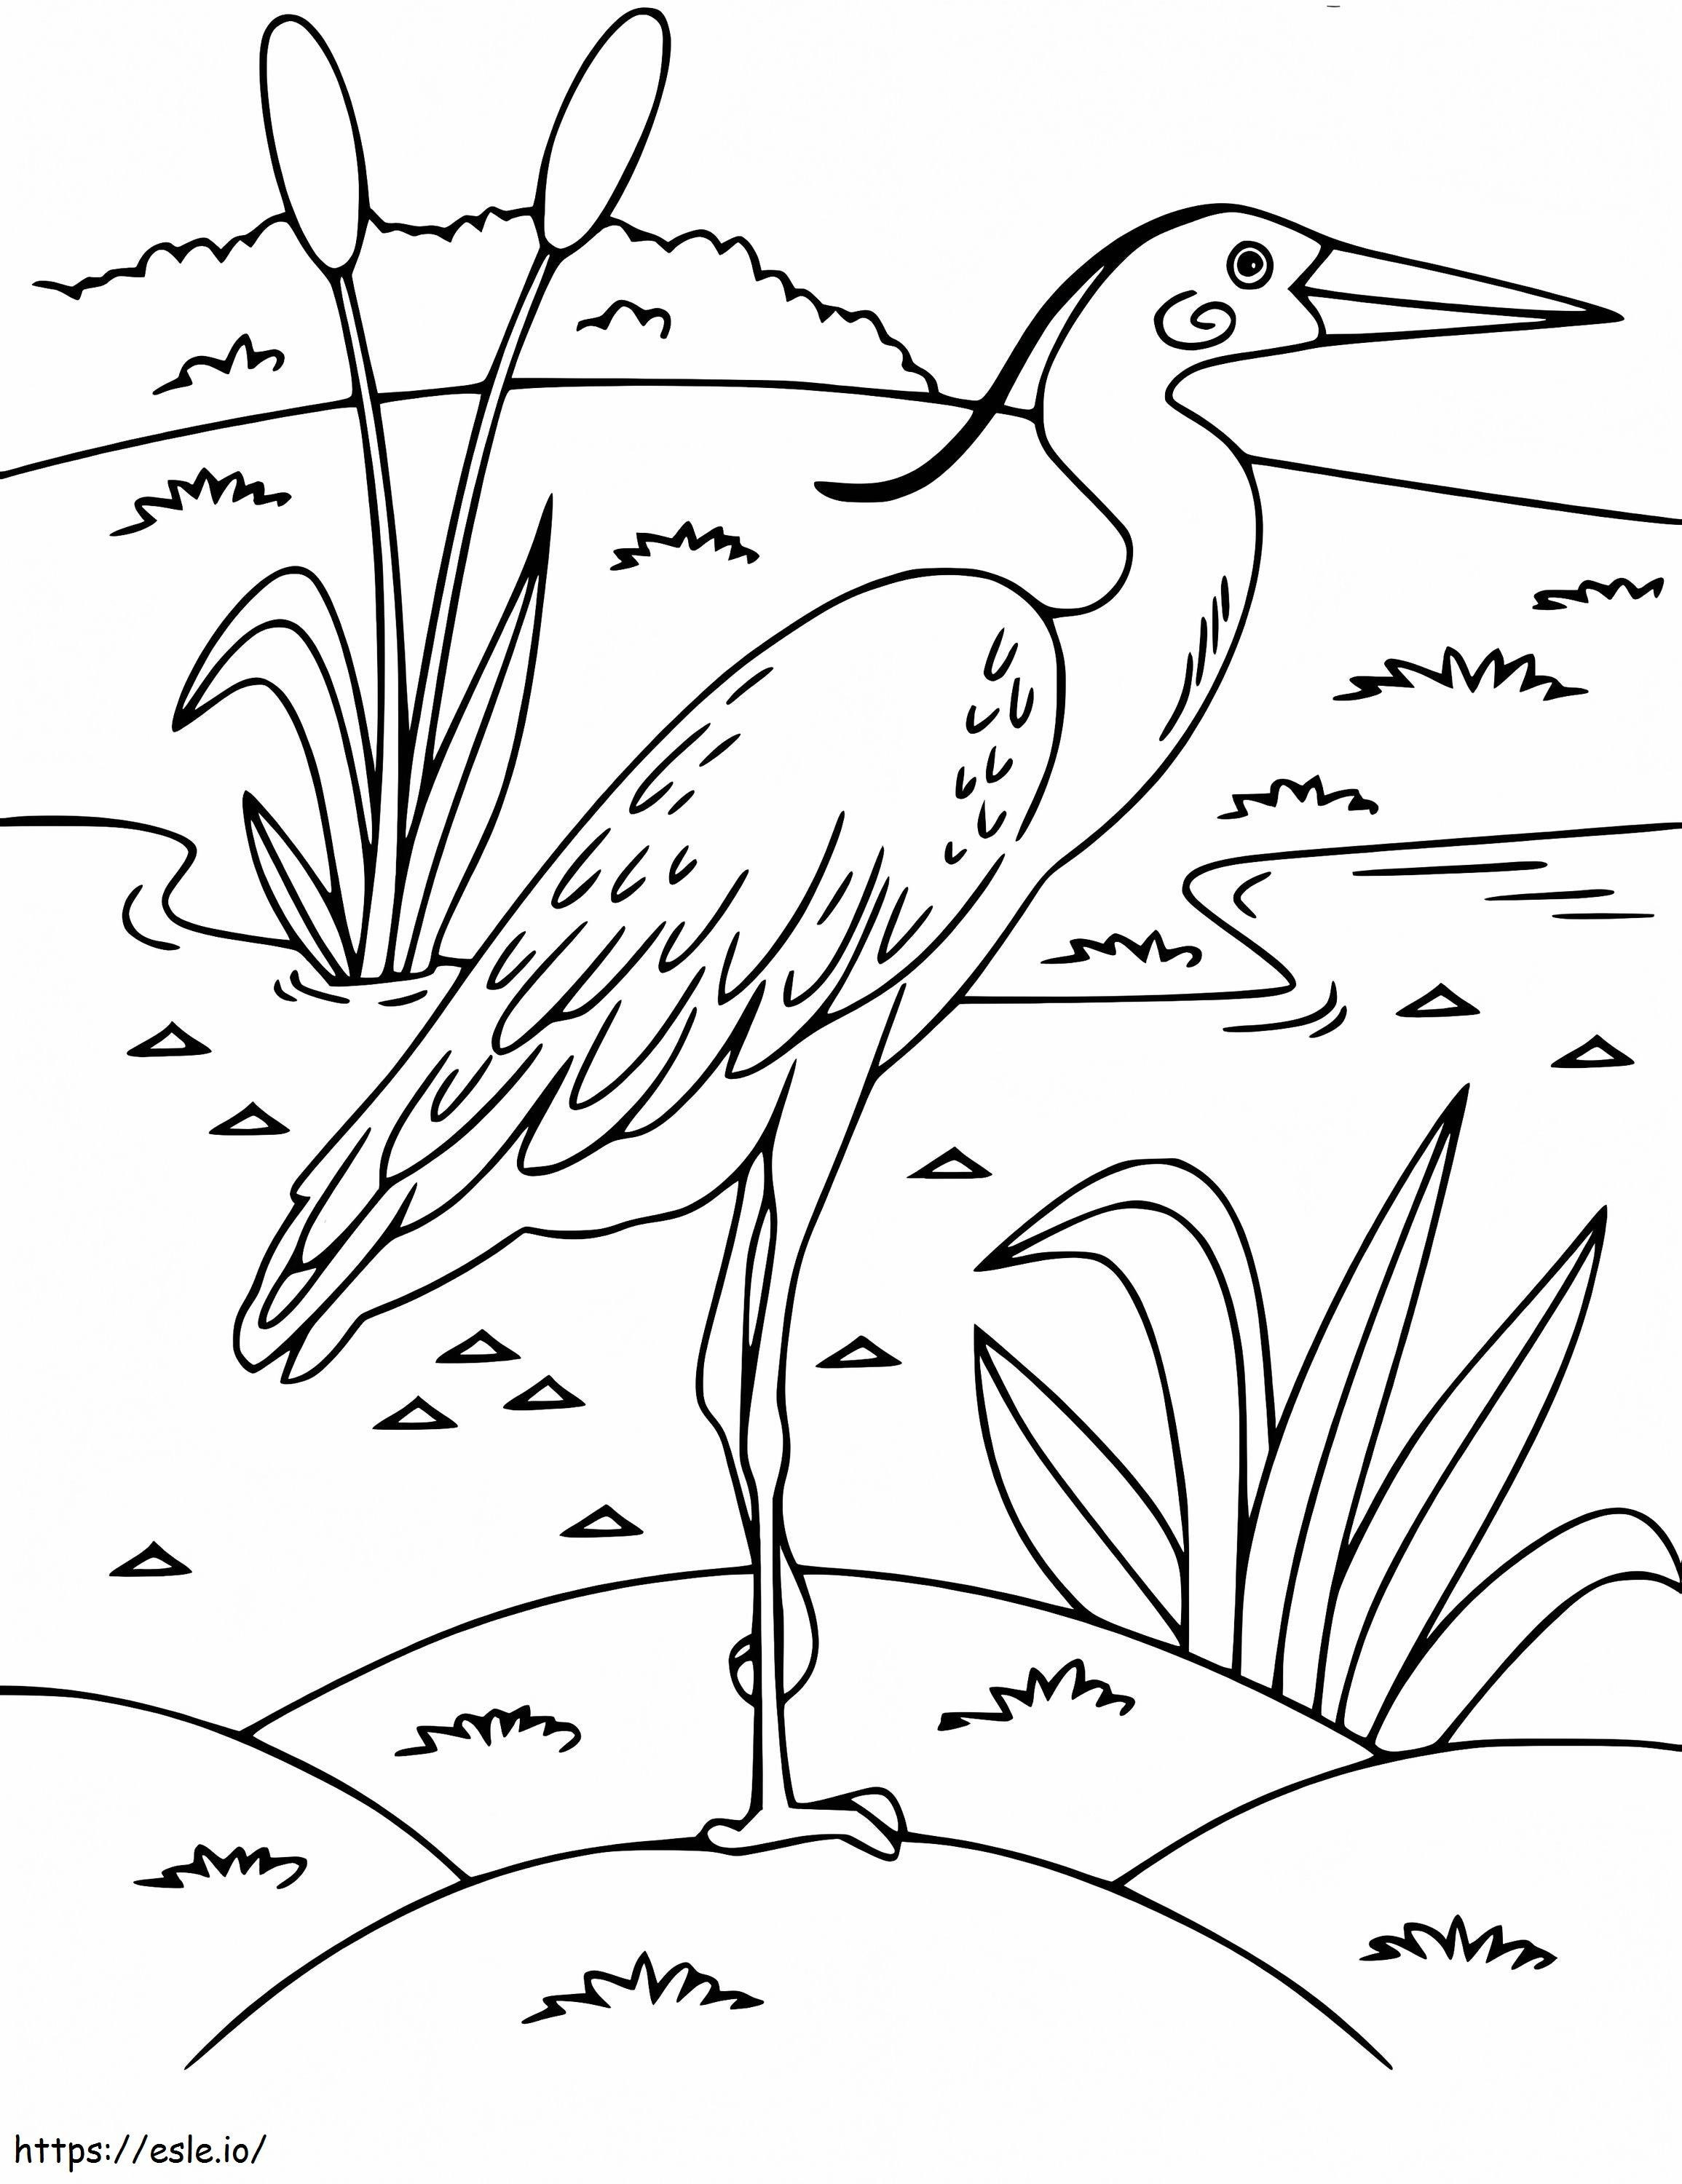 Lovely Egret coloring page